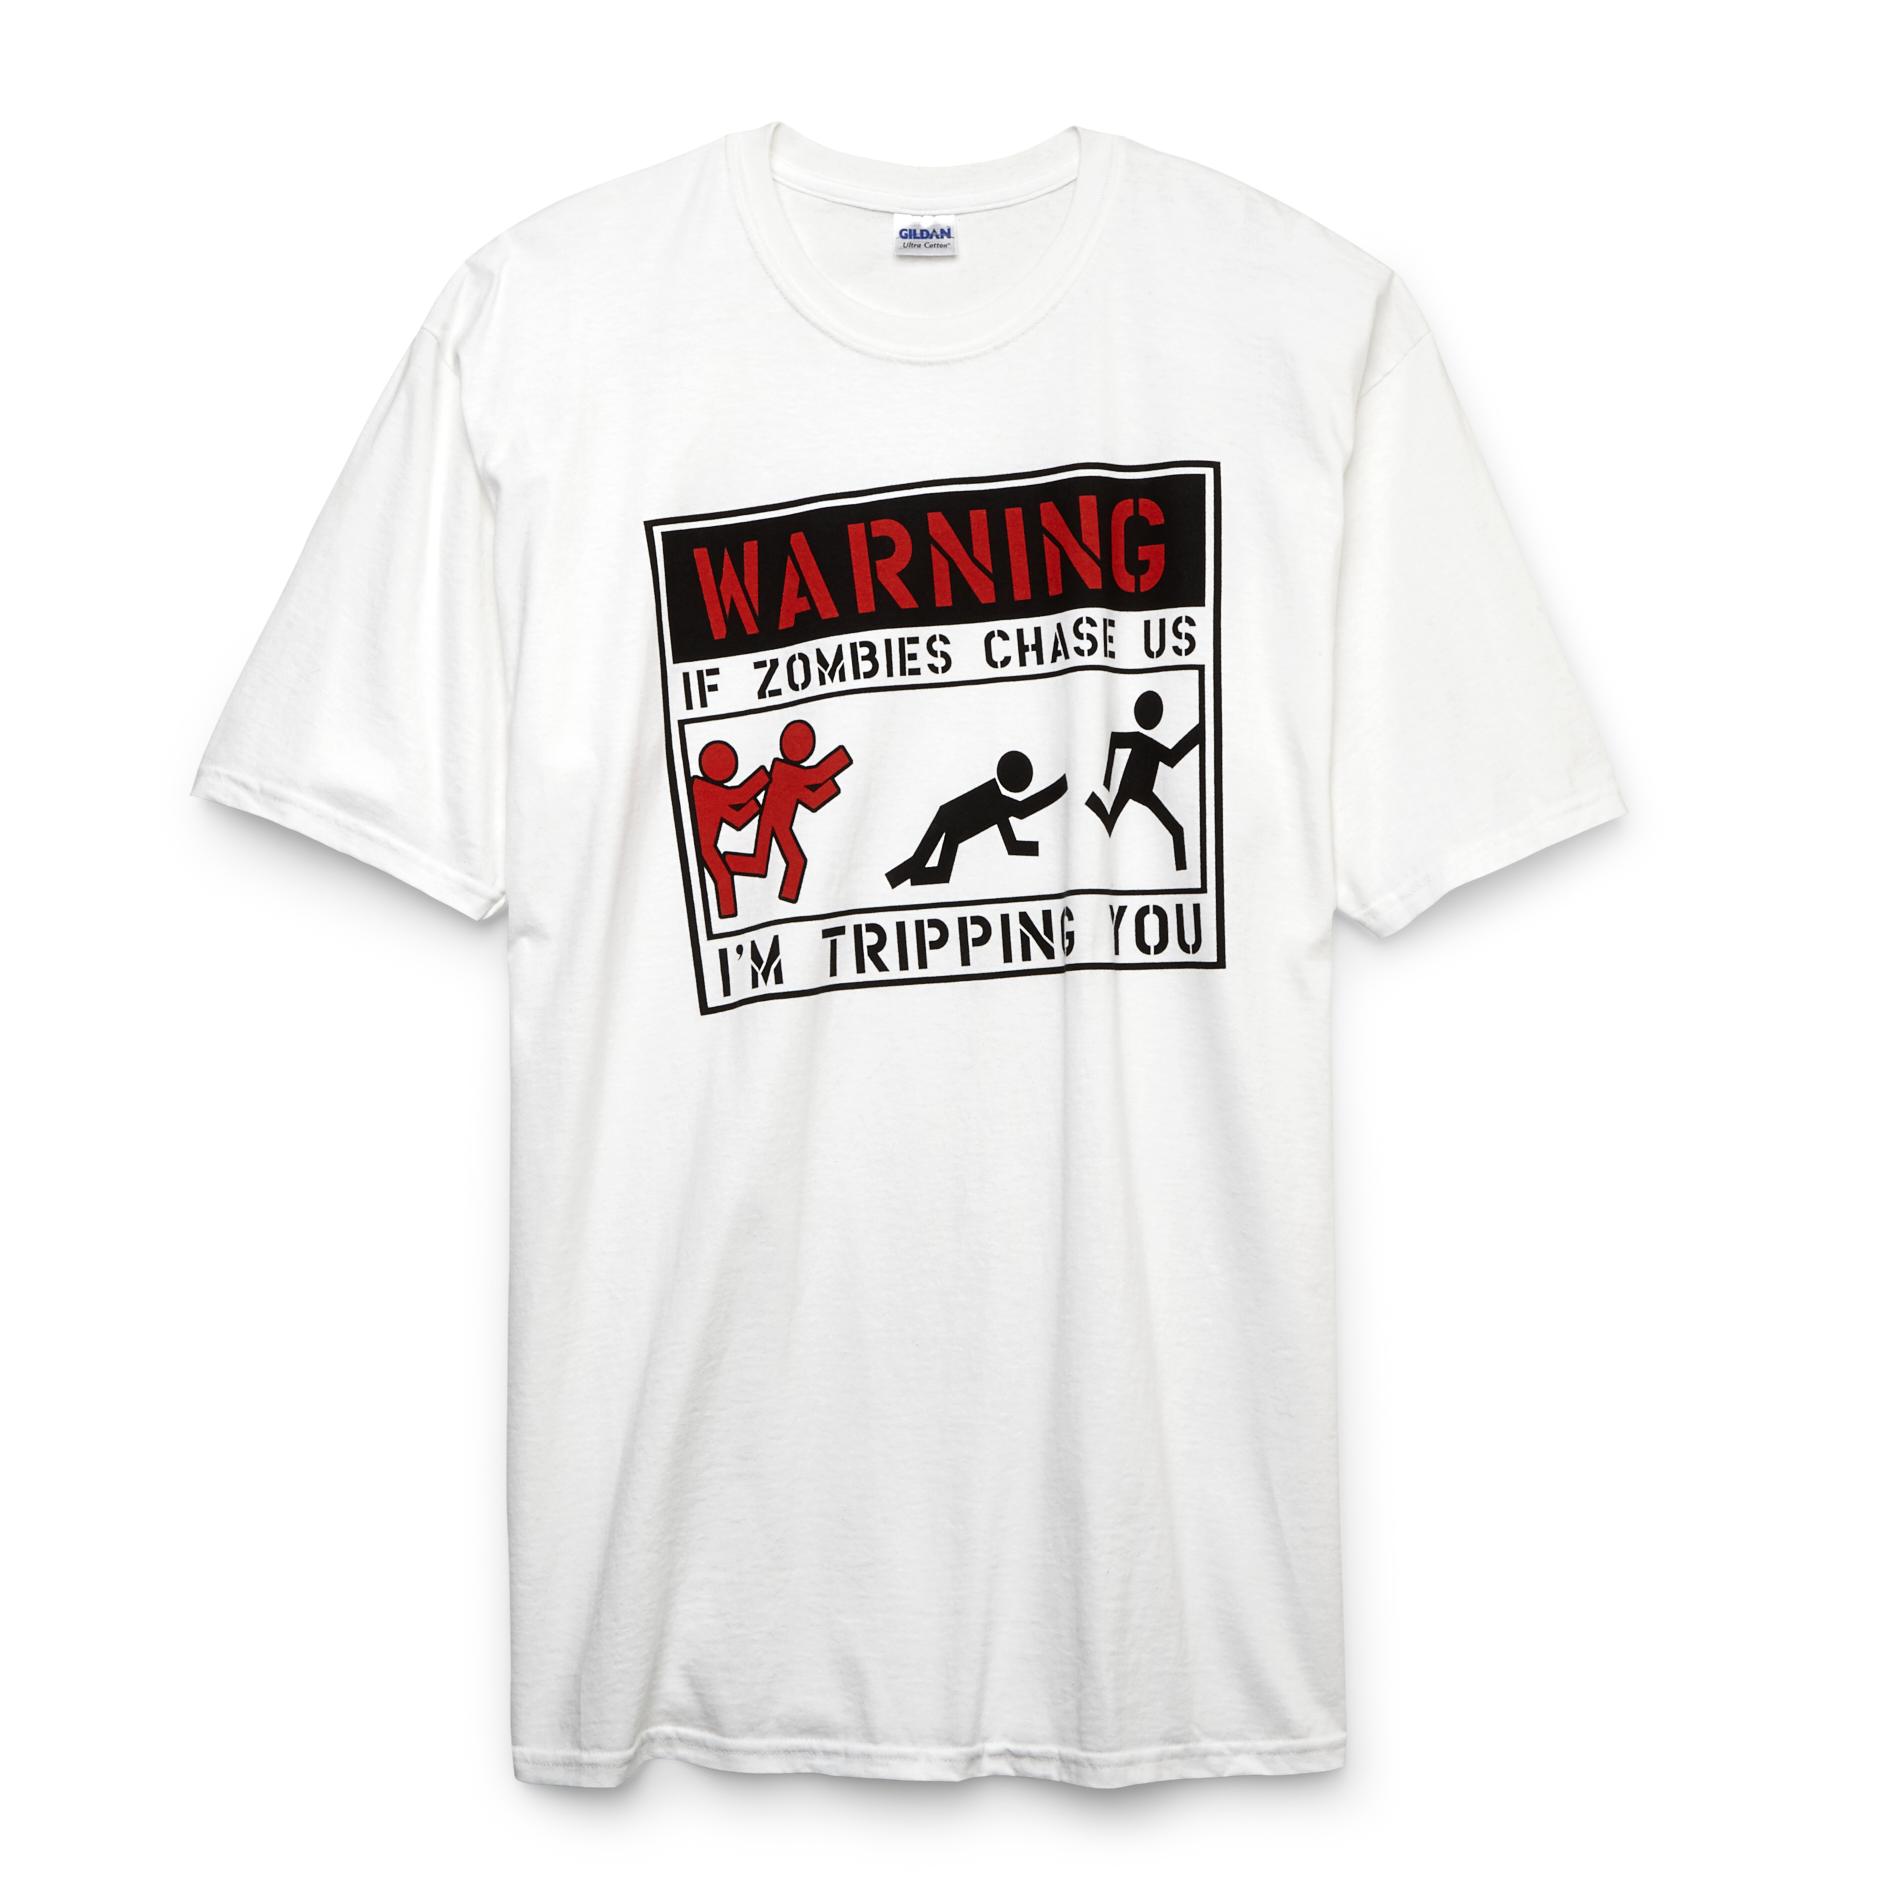 Men's Big & Tall Graphic T- Shirt - If Zombies Chase Us